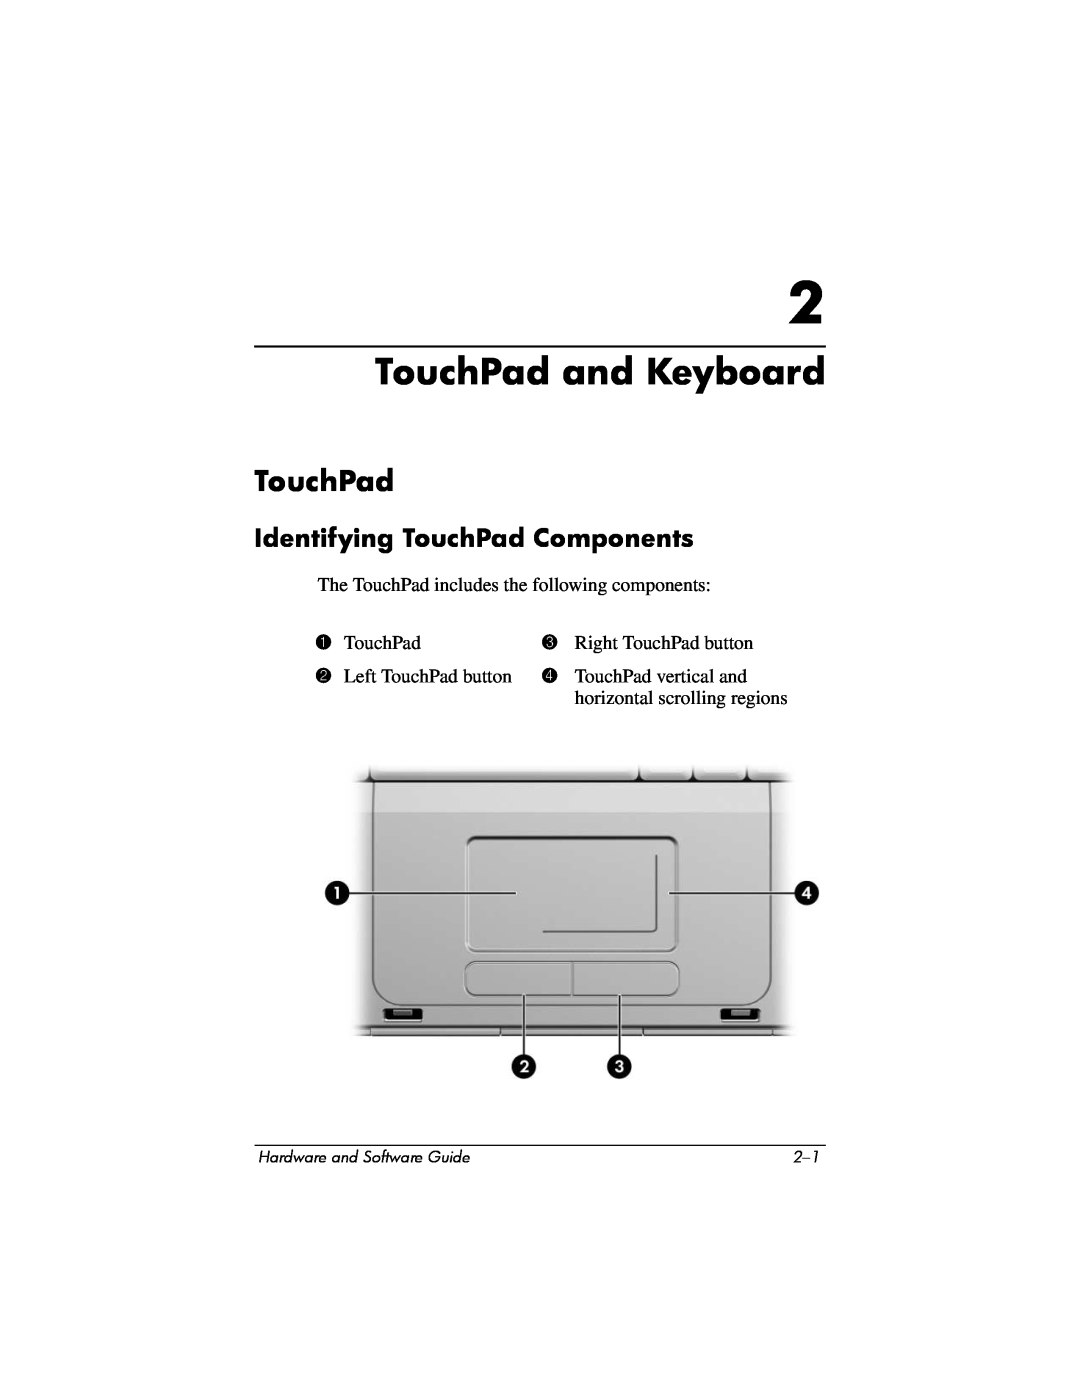 Compaq Presario M2000 manual TouchPad and Keyboard, Identifying TouchPad Components 